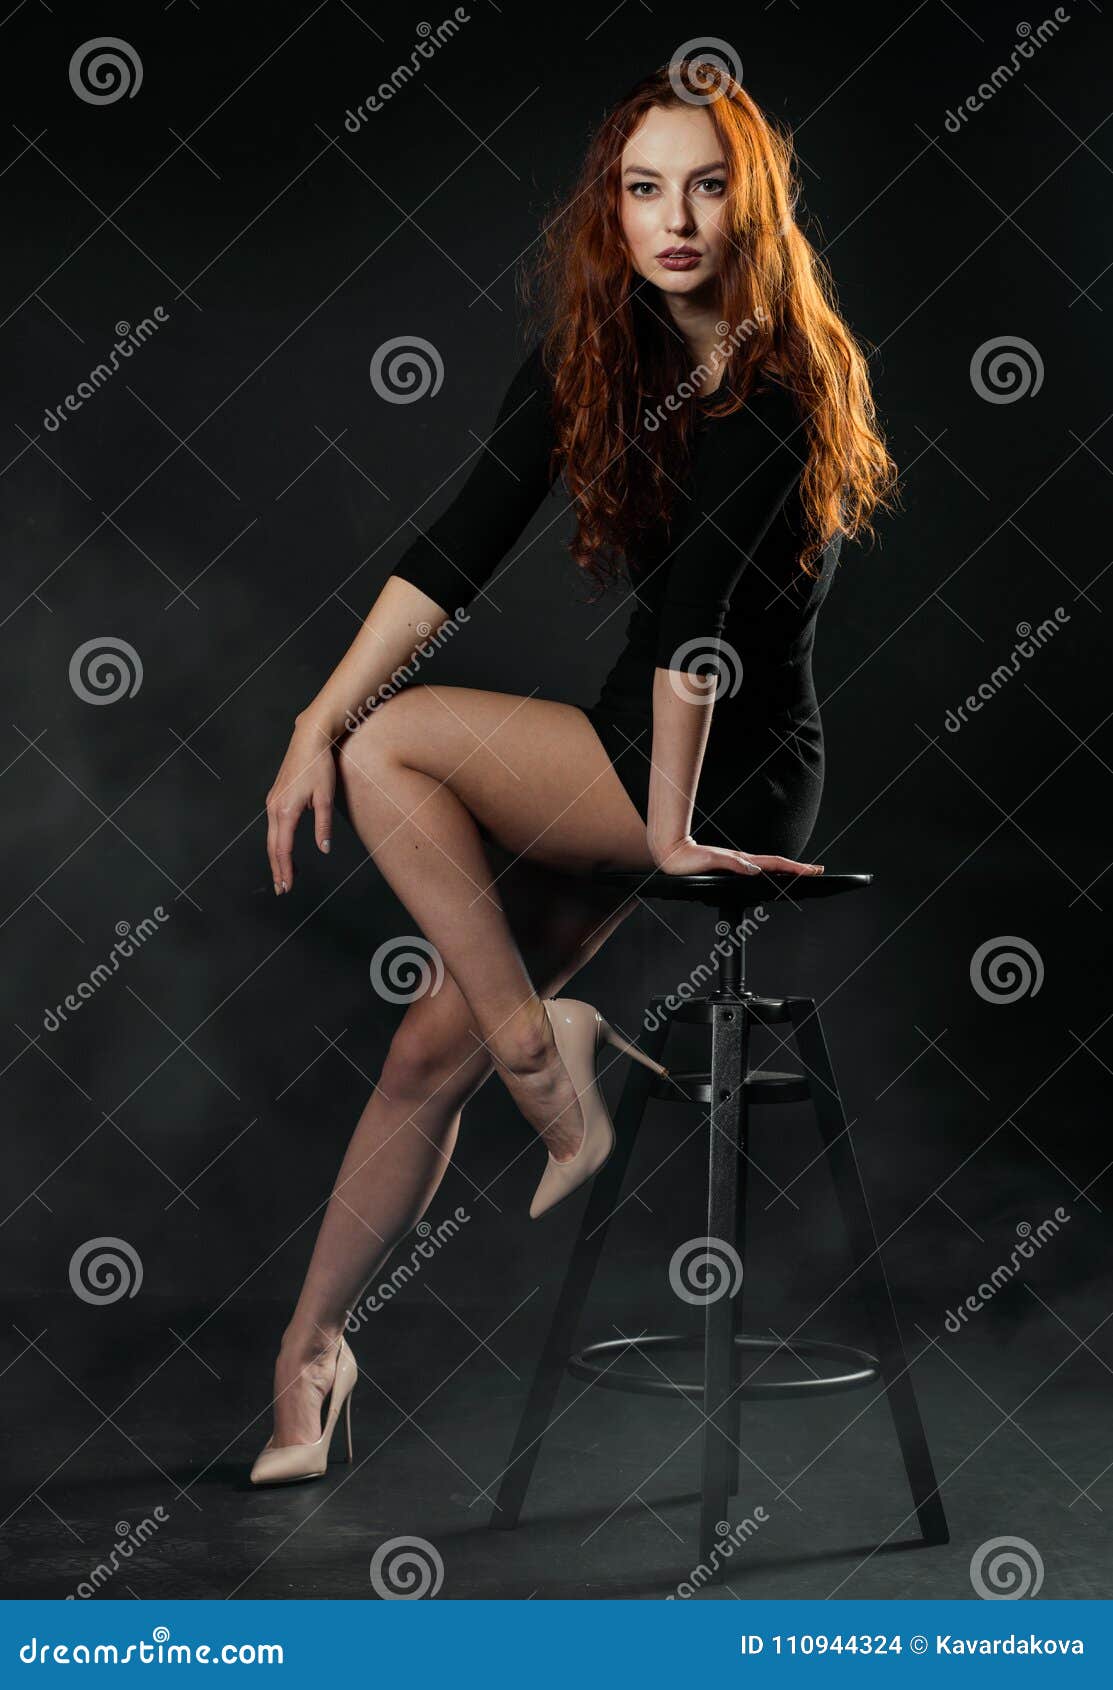 Positive young female model in sportsclothes rides on blades enjoys leisure  activities poses at urban place against blurred background stands in full  length. Active lifestyle and rollerblading concept - a Royalty Free